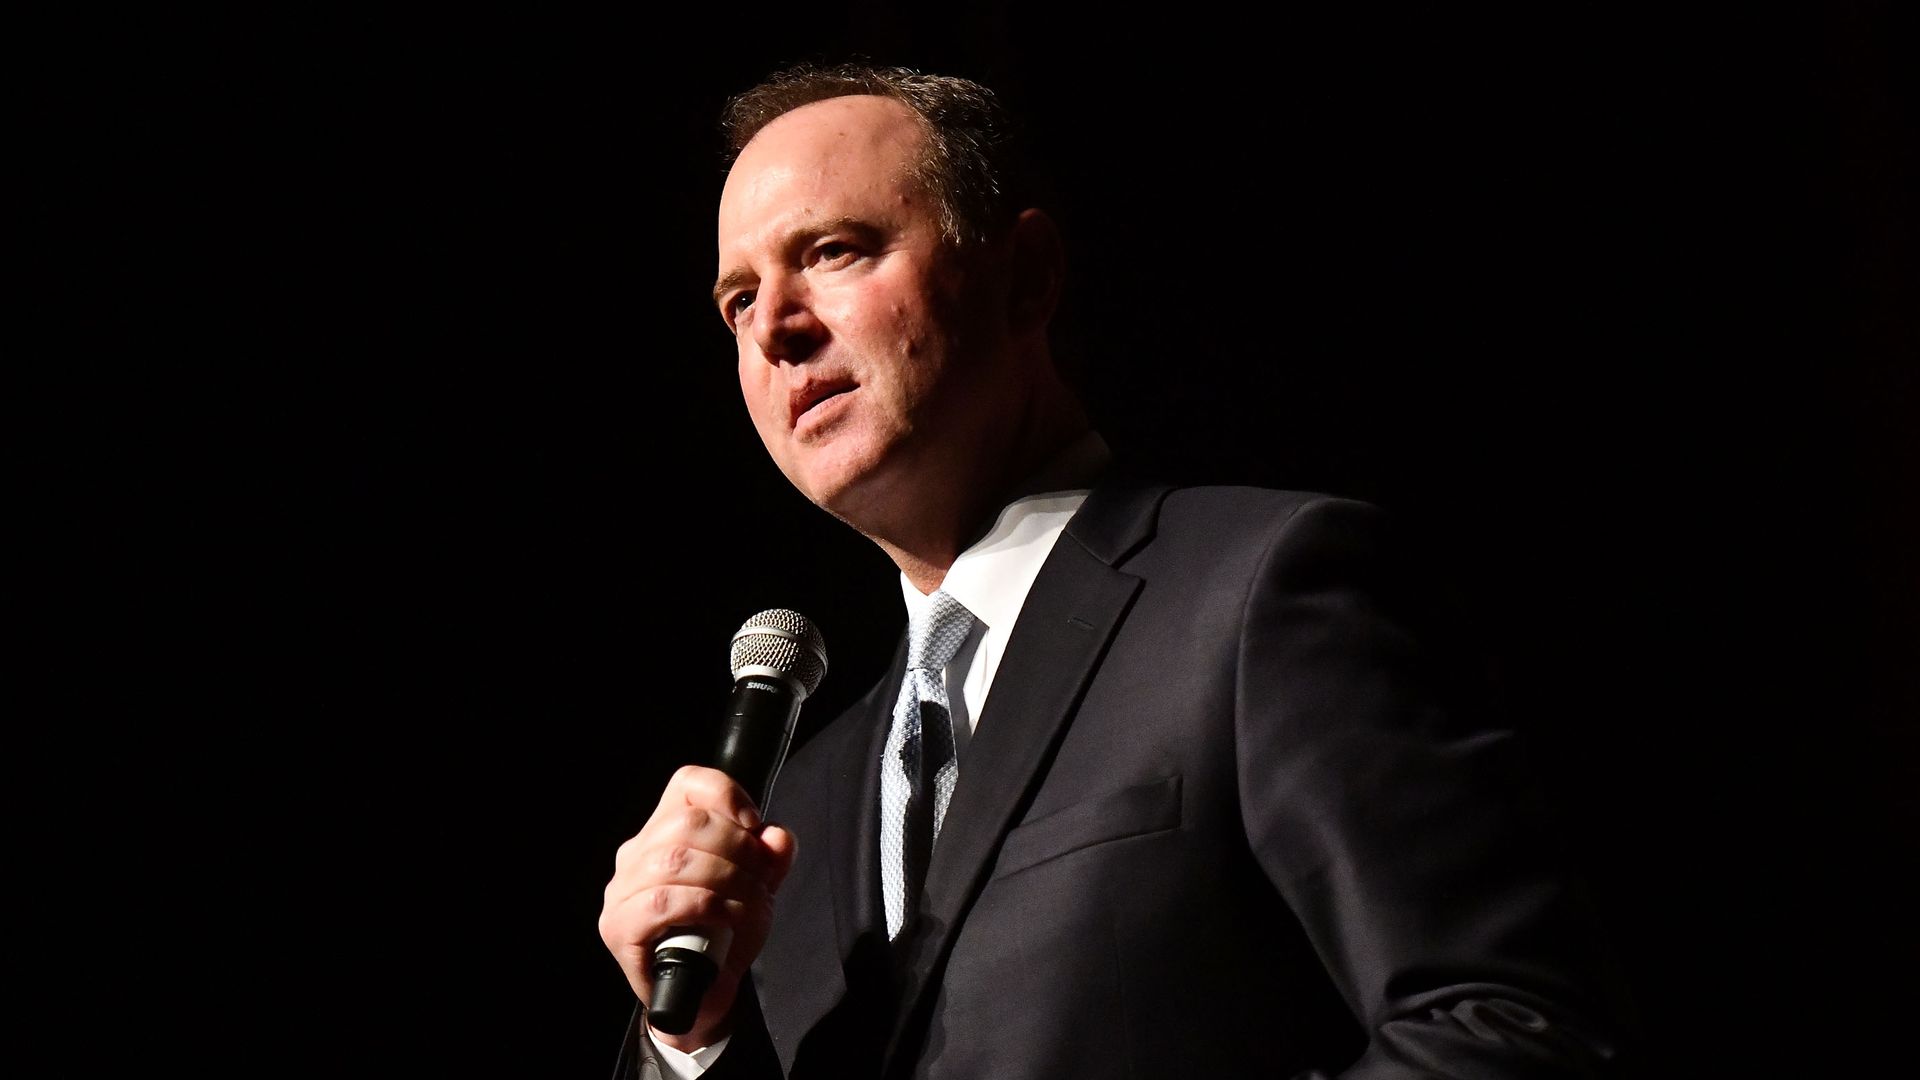  California Congressman Adam Schiff attends The Last Weekend Kickoff LA Presented by Swing Left at The Palace Theatre on November 1, 2018 in Los Angeles, California.